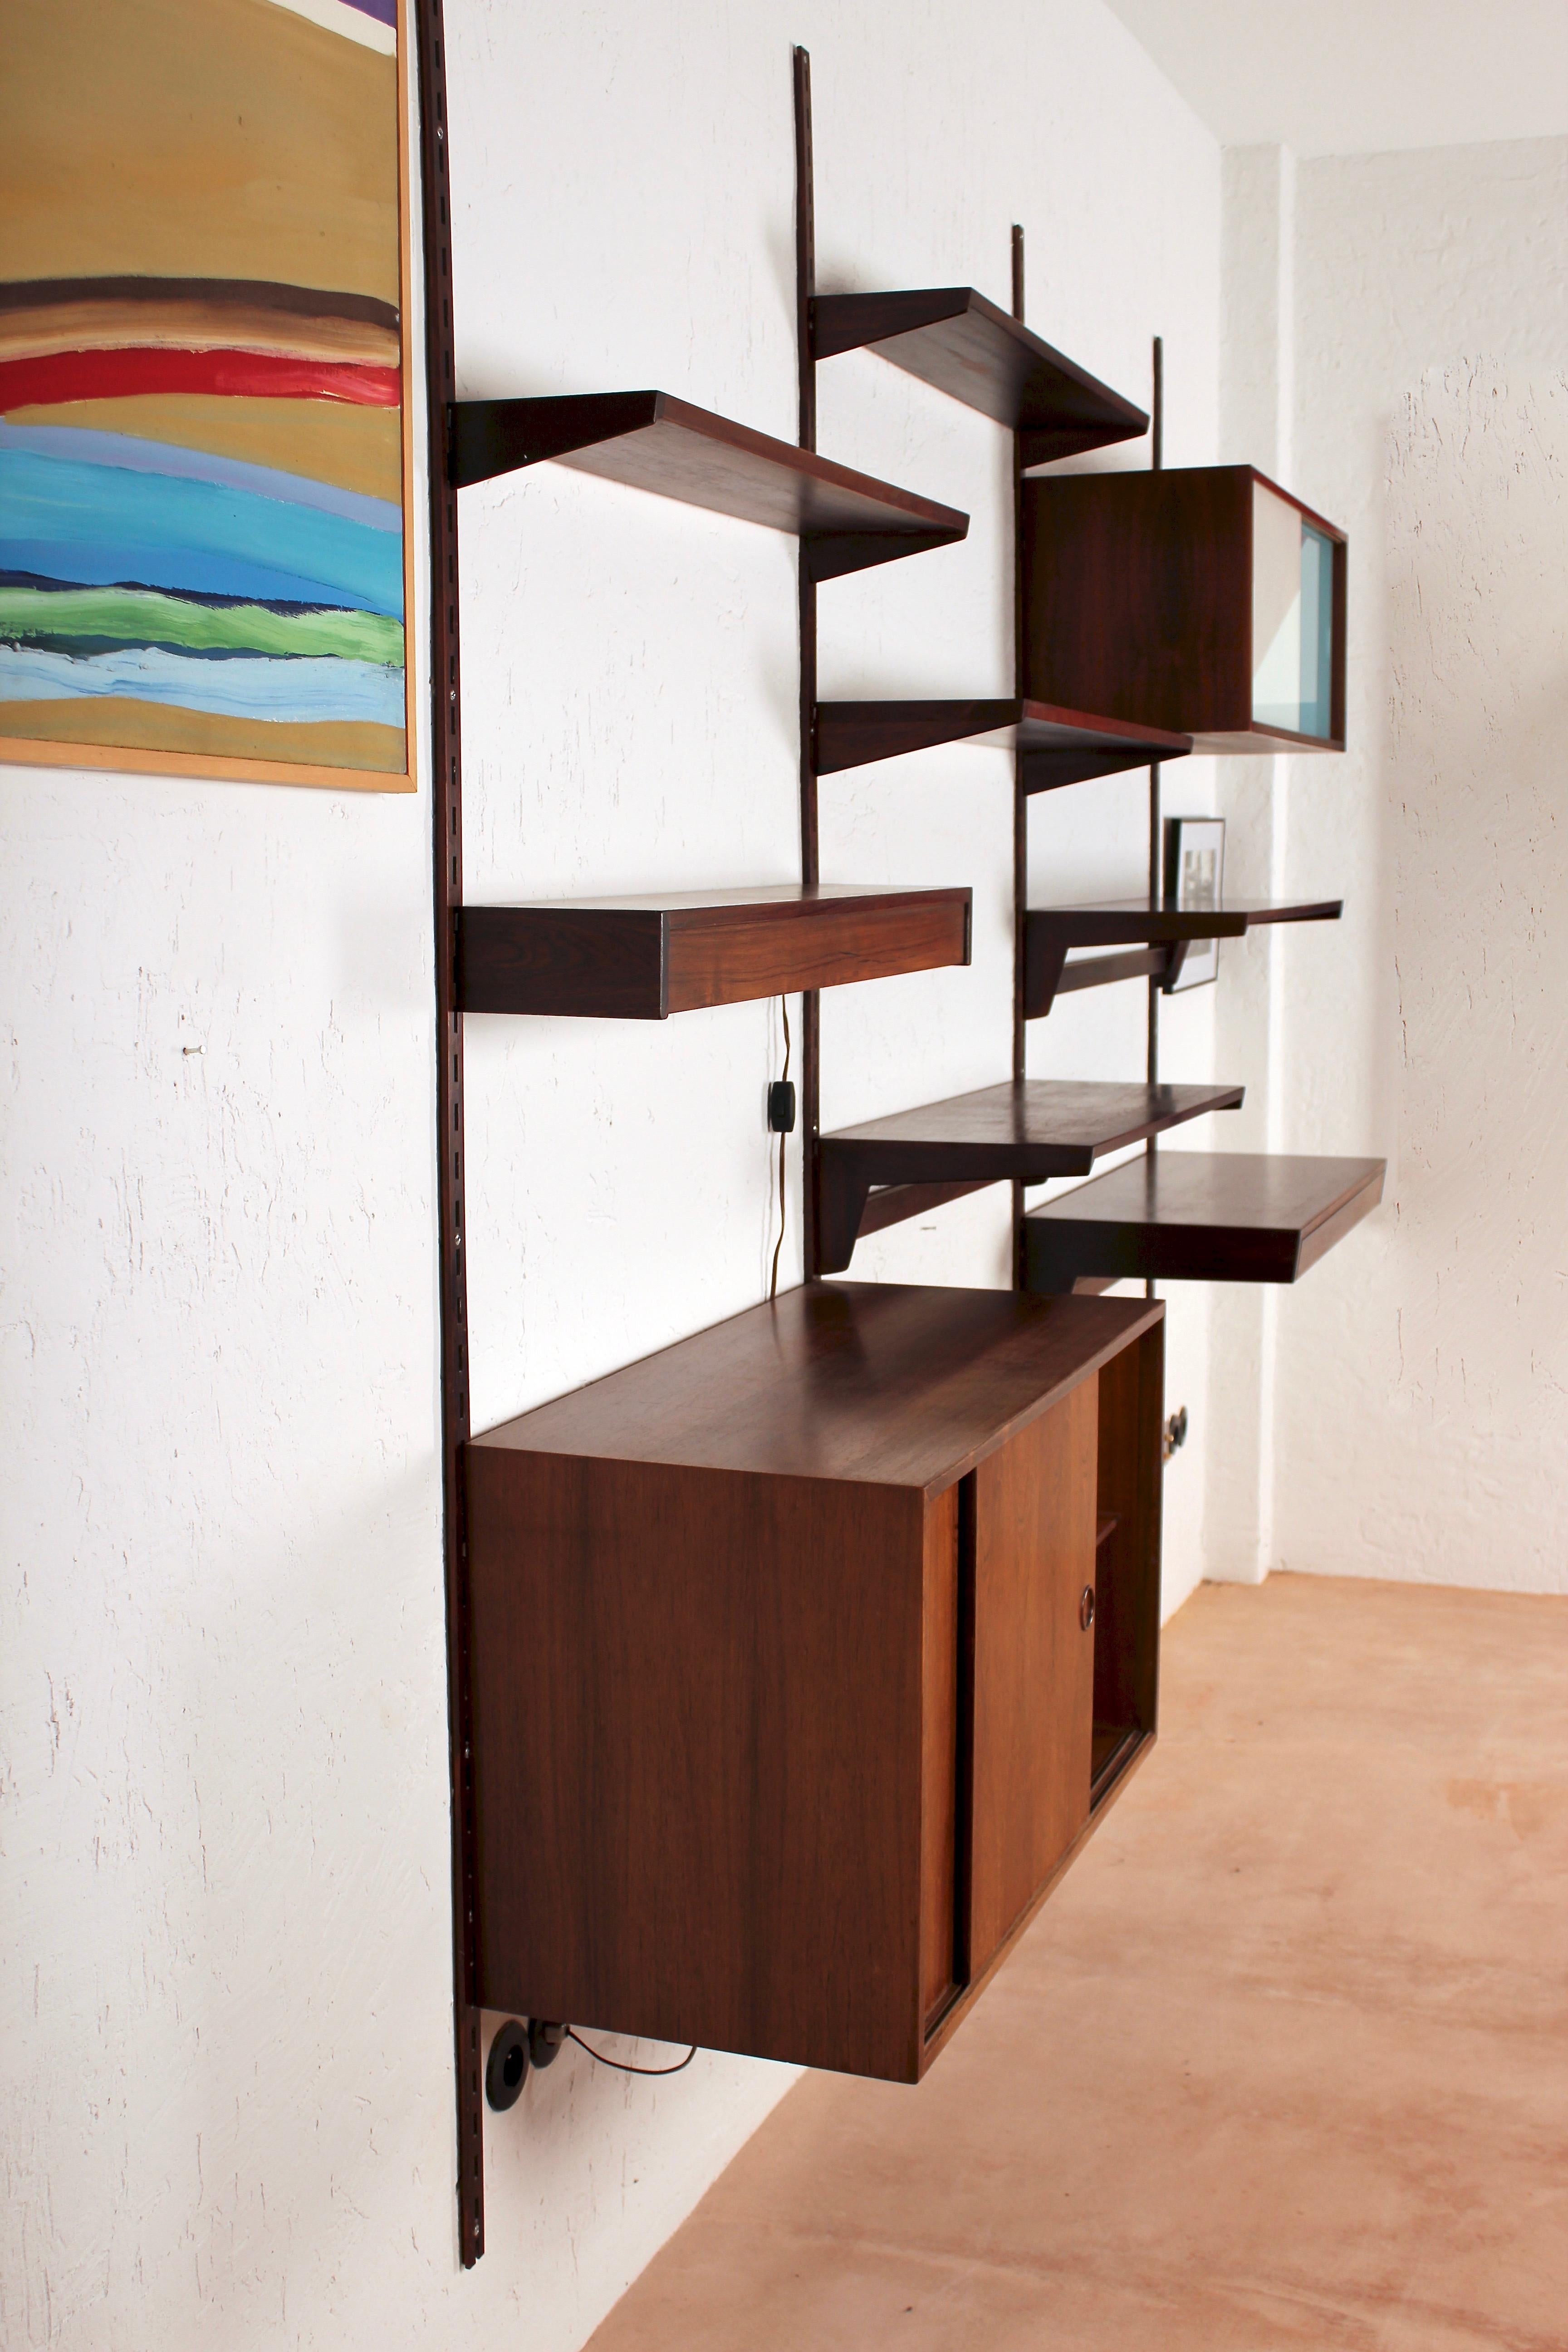 Very elegant 1960s rosewood 10 pieces wall unit by Kai Kristiansen for FM Møbler, Denmark. 1 box with sliding doors in lamellae, 1 box with sliding glass, 1 electrified shelf, 1 shelf with drawer and 6 shelves.